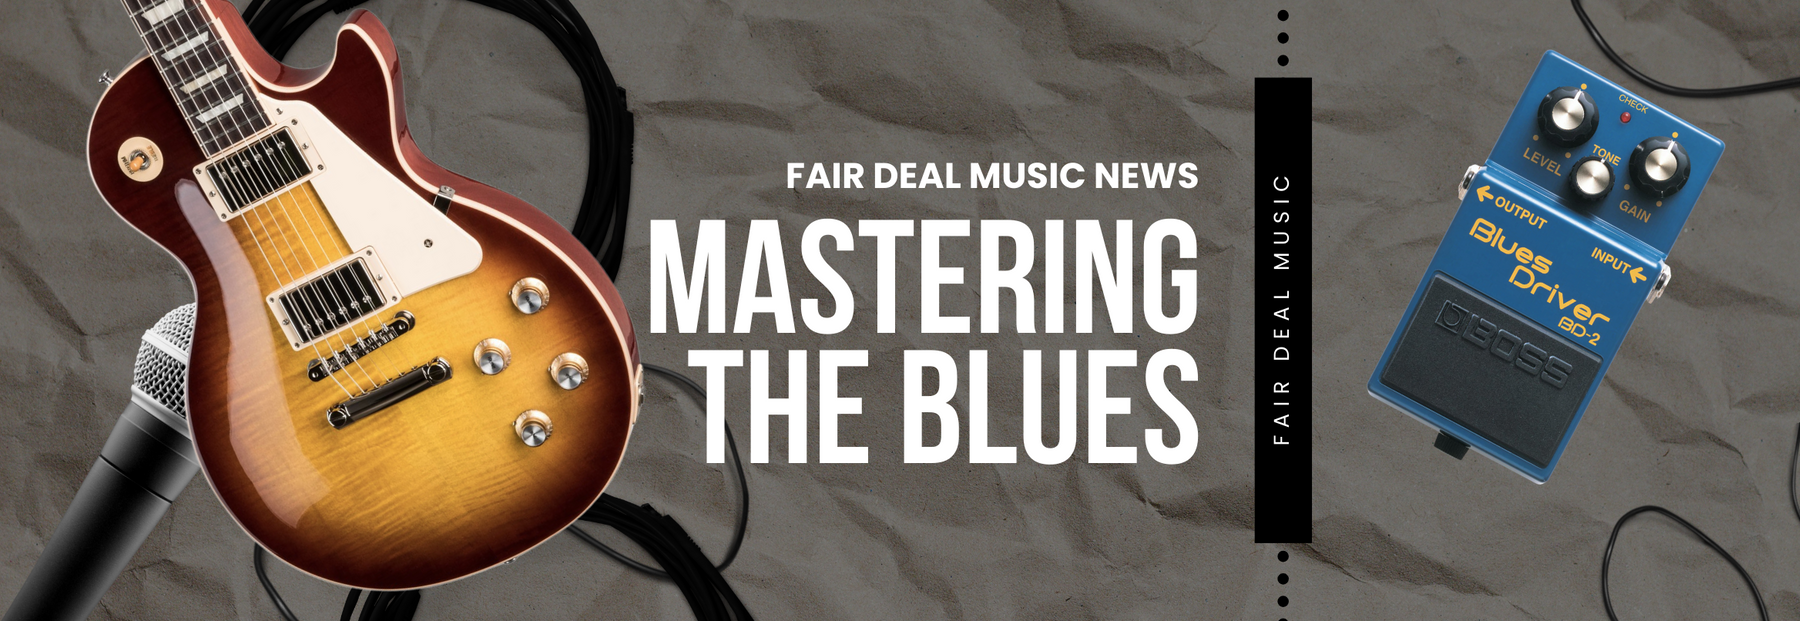 Mastering the Blues: How to Get That Classic Guitar Tone with Stock Gear from Fair Deal Music